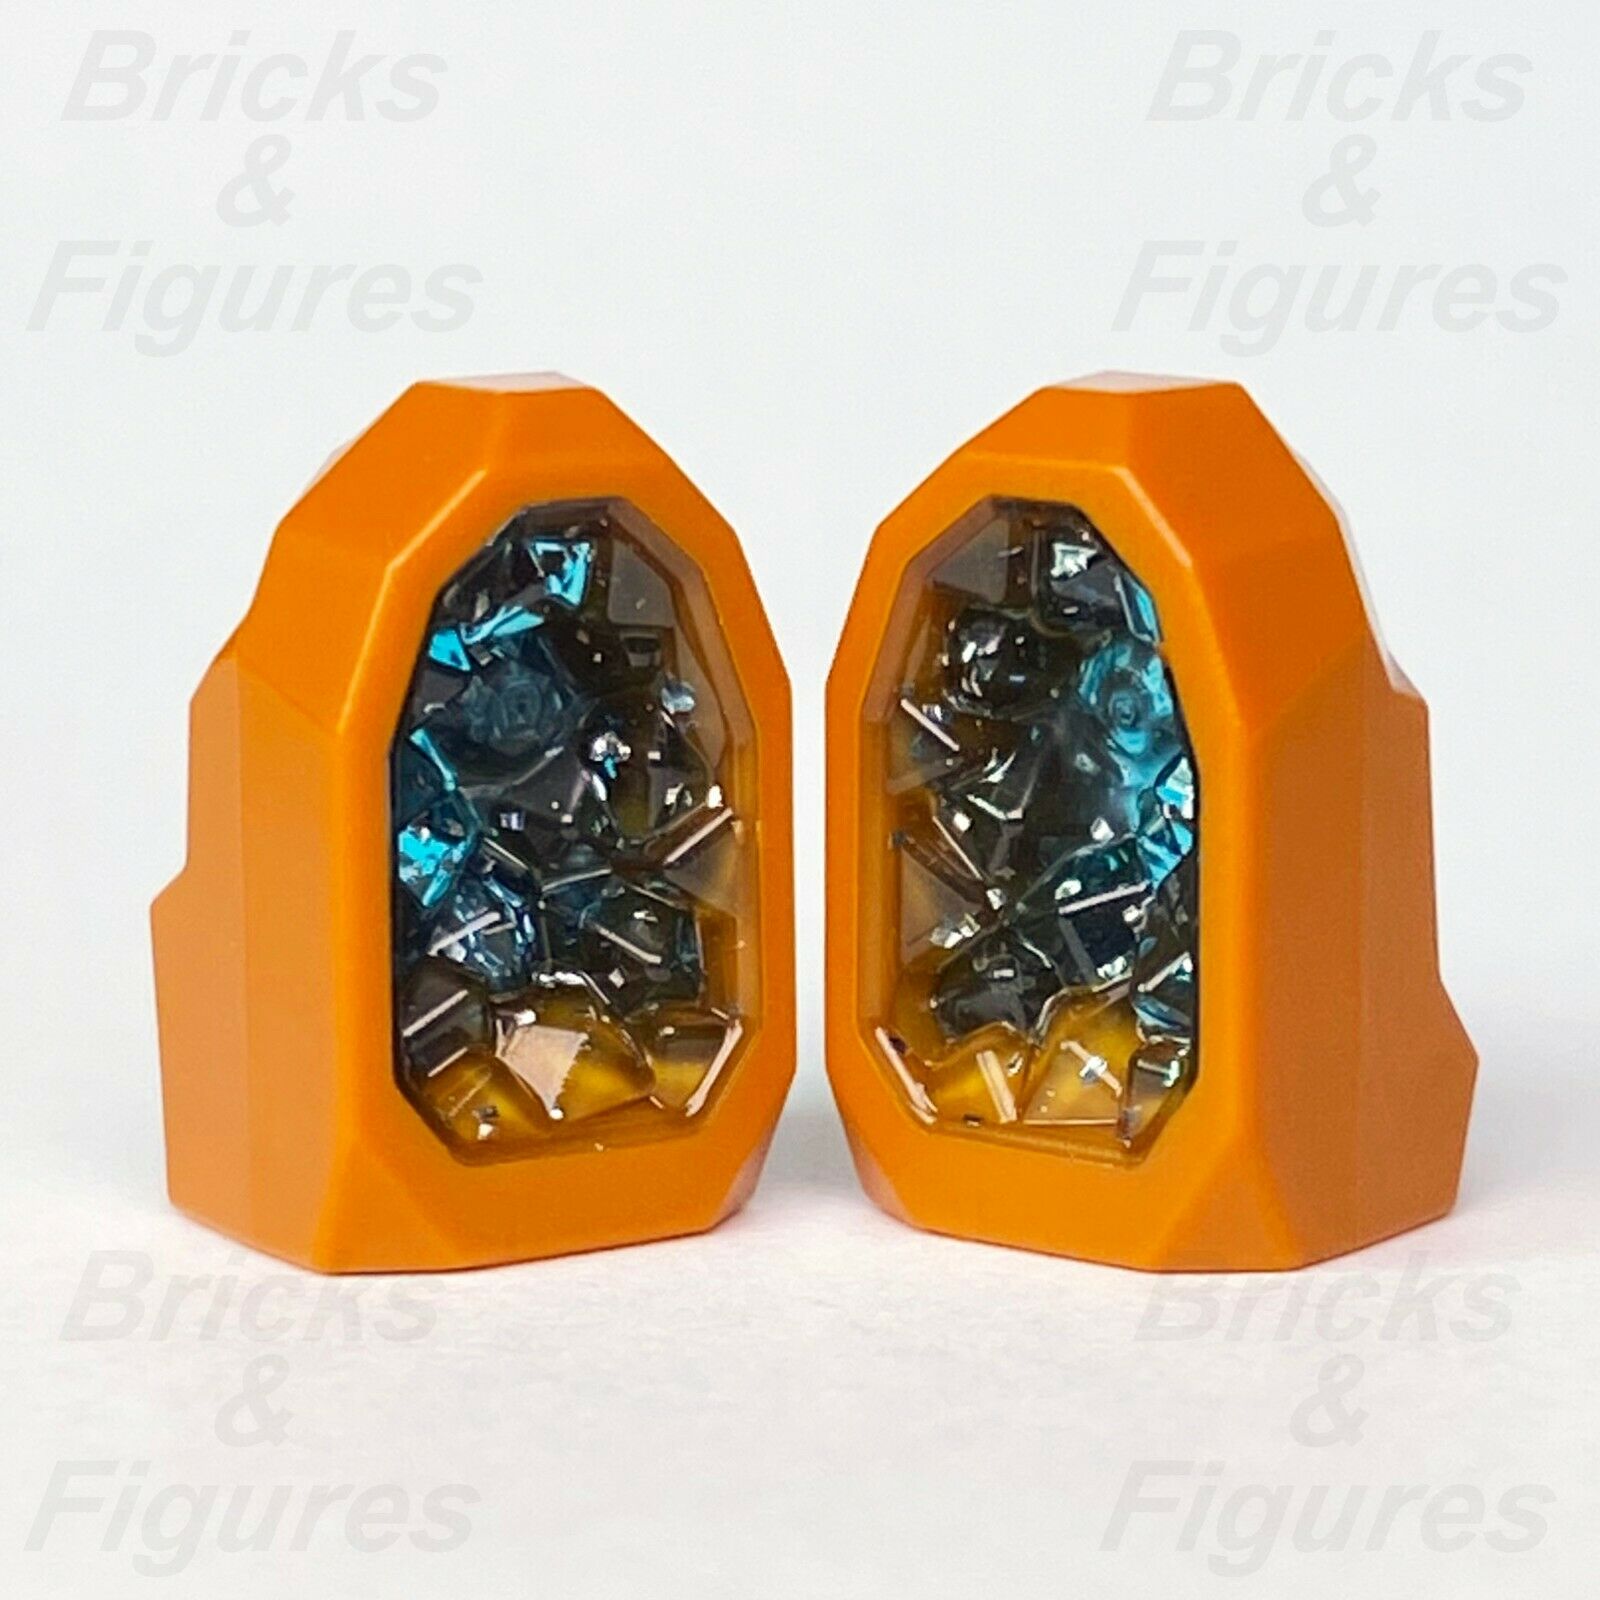 2 x Town City LEGO Rock Geode with Light Blue Crystals Space Port 60227 60226 - Bricks & Figures